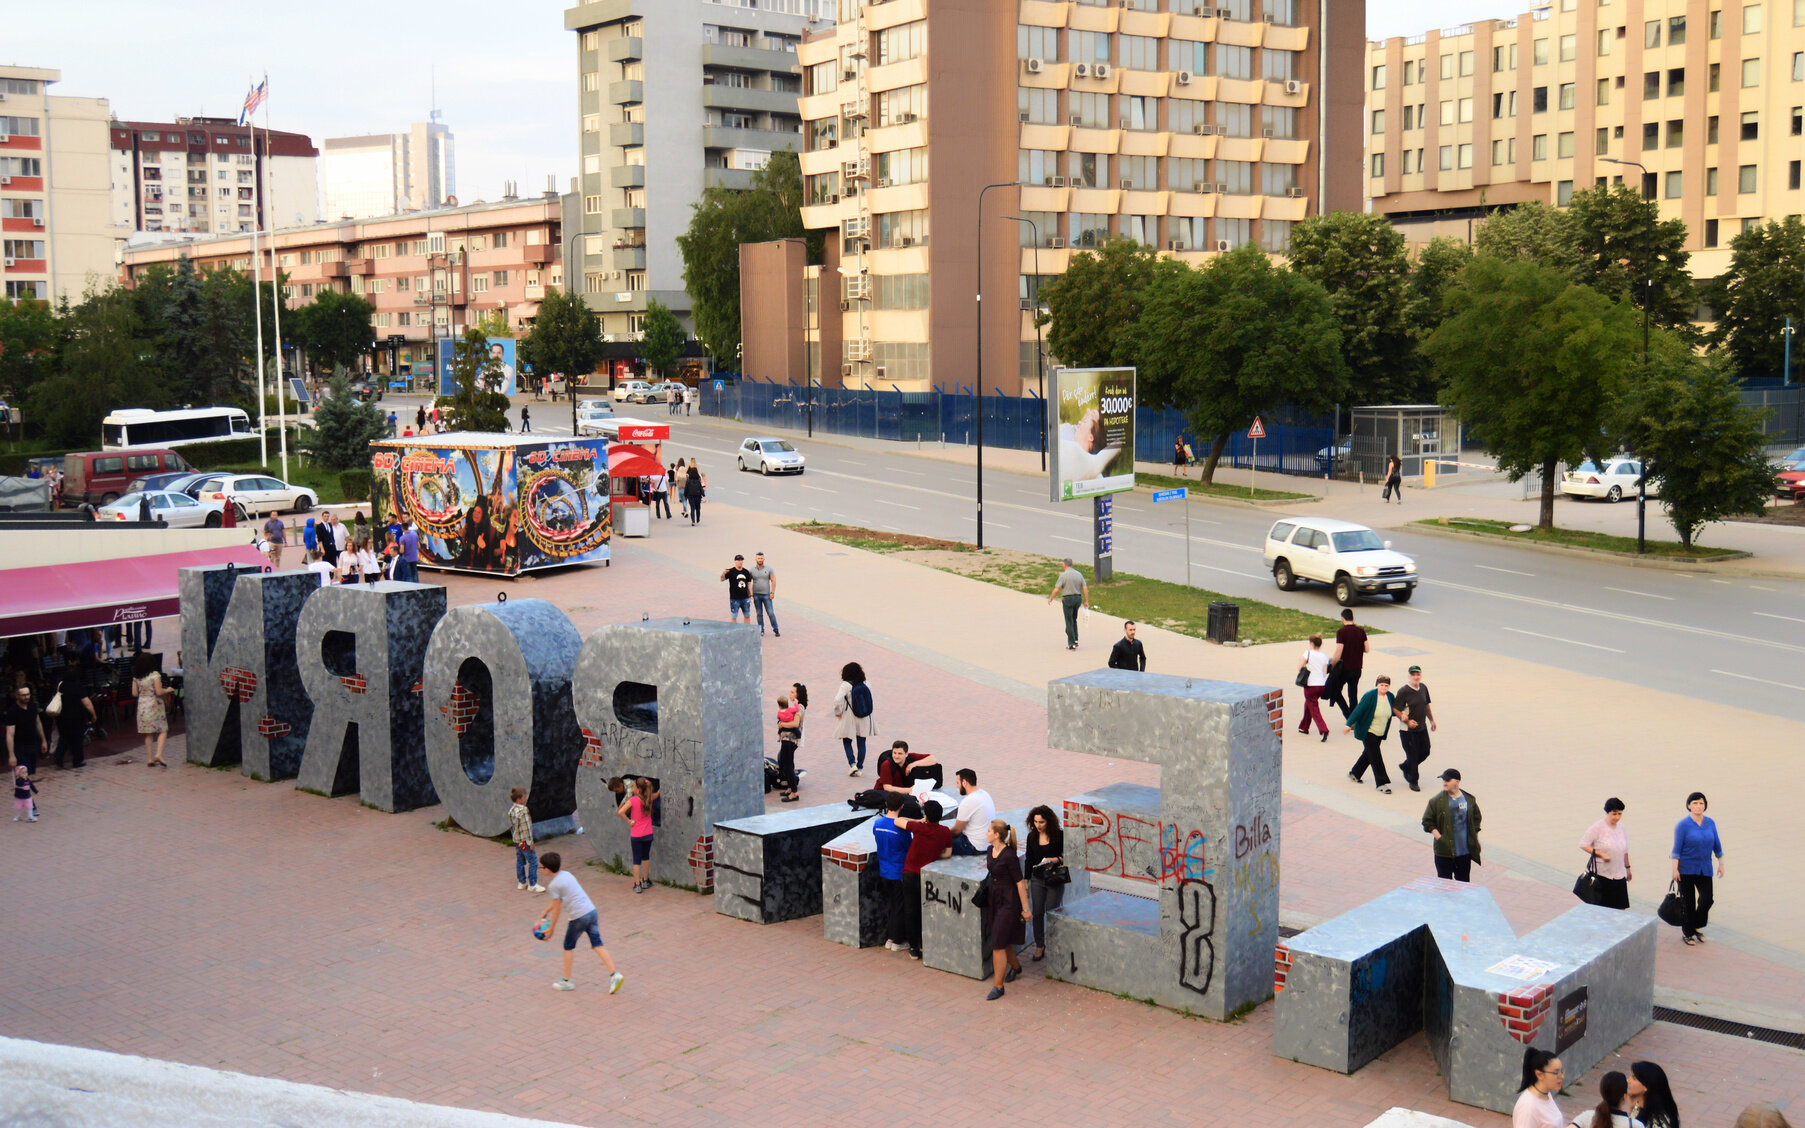 Children climb on the Newborn monument outside of the Youth and Sports Center in Pristina.